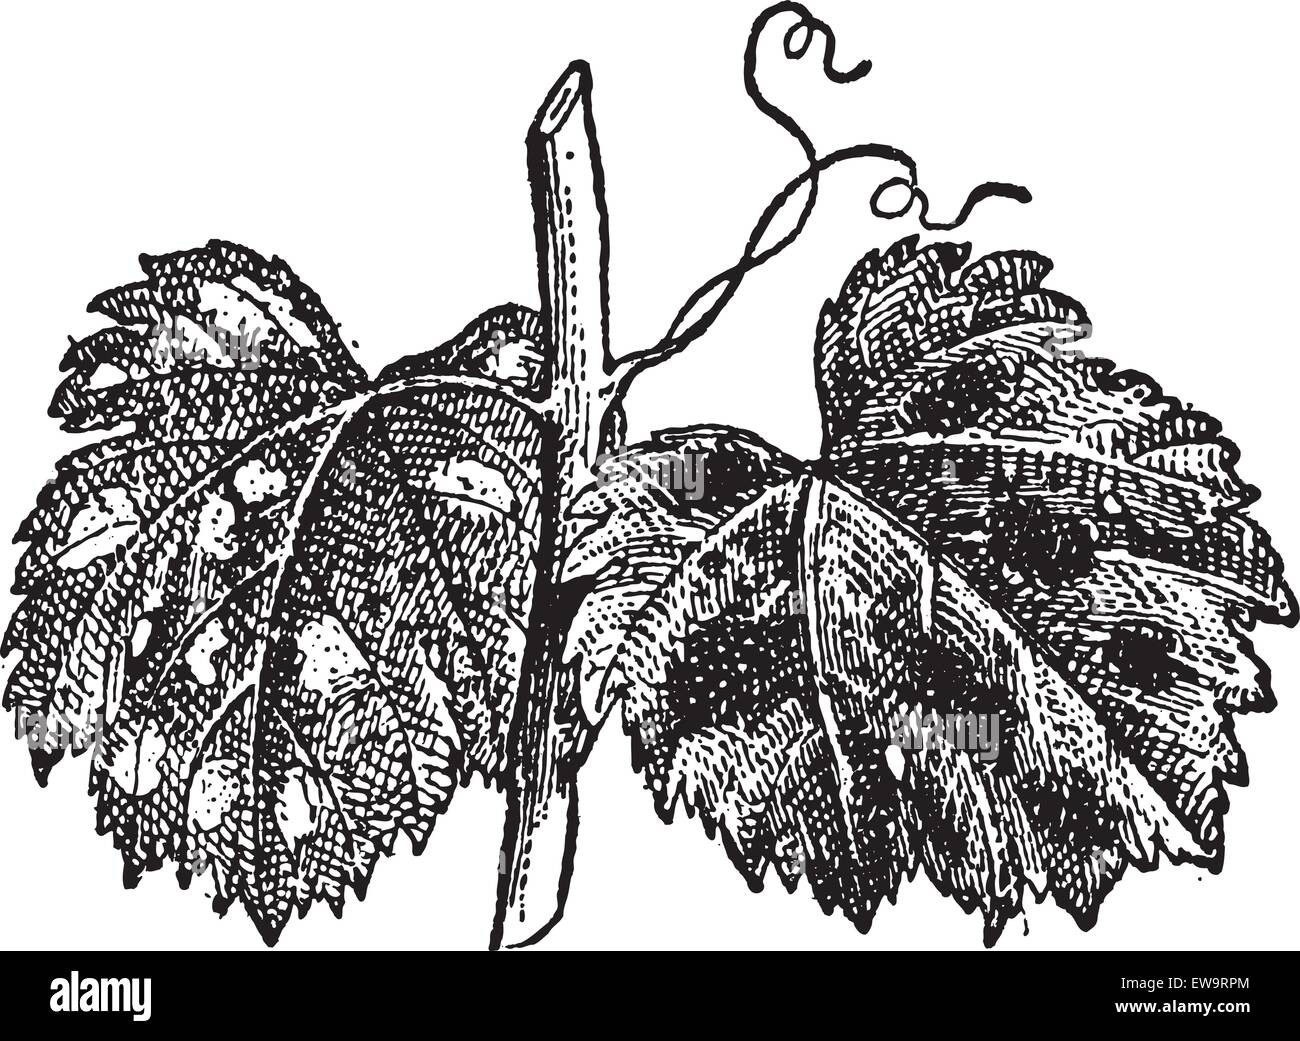 Powdery Mildew or Blumeria graminis, shown on the surface of the grape leaves, vintage engraved illustration. Dictionary of Words and Things - Larive and Fleury - 1895 Stock Vector